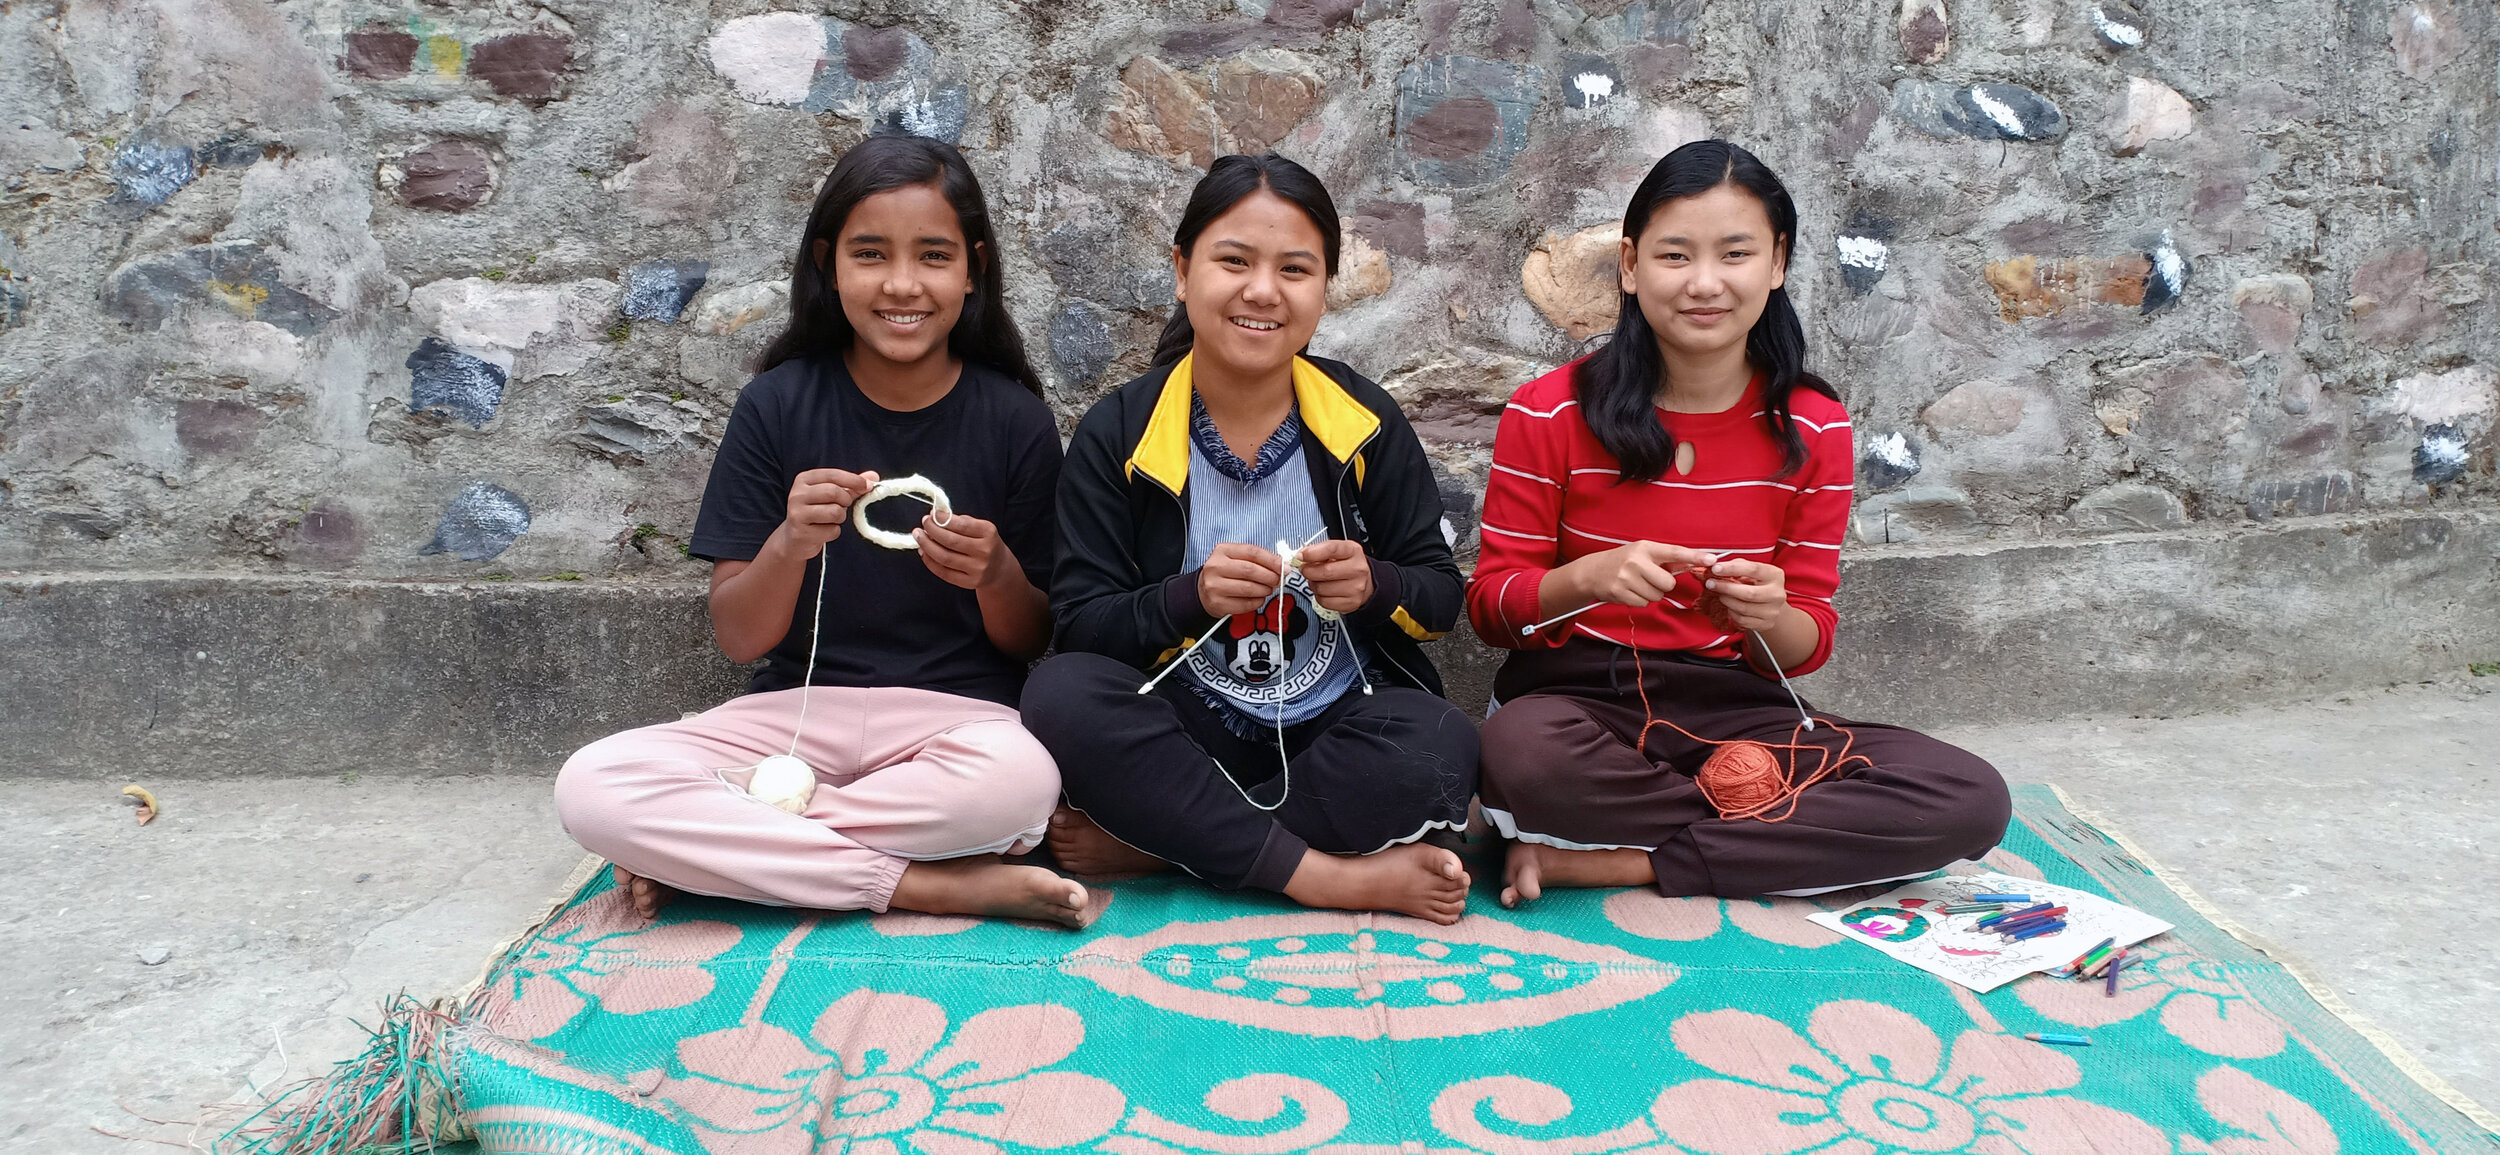  These girls in Kalimpong enjoy handicrafts together during the Covid-19 lockdown. 